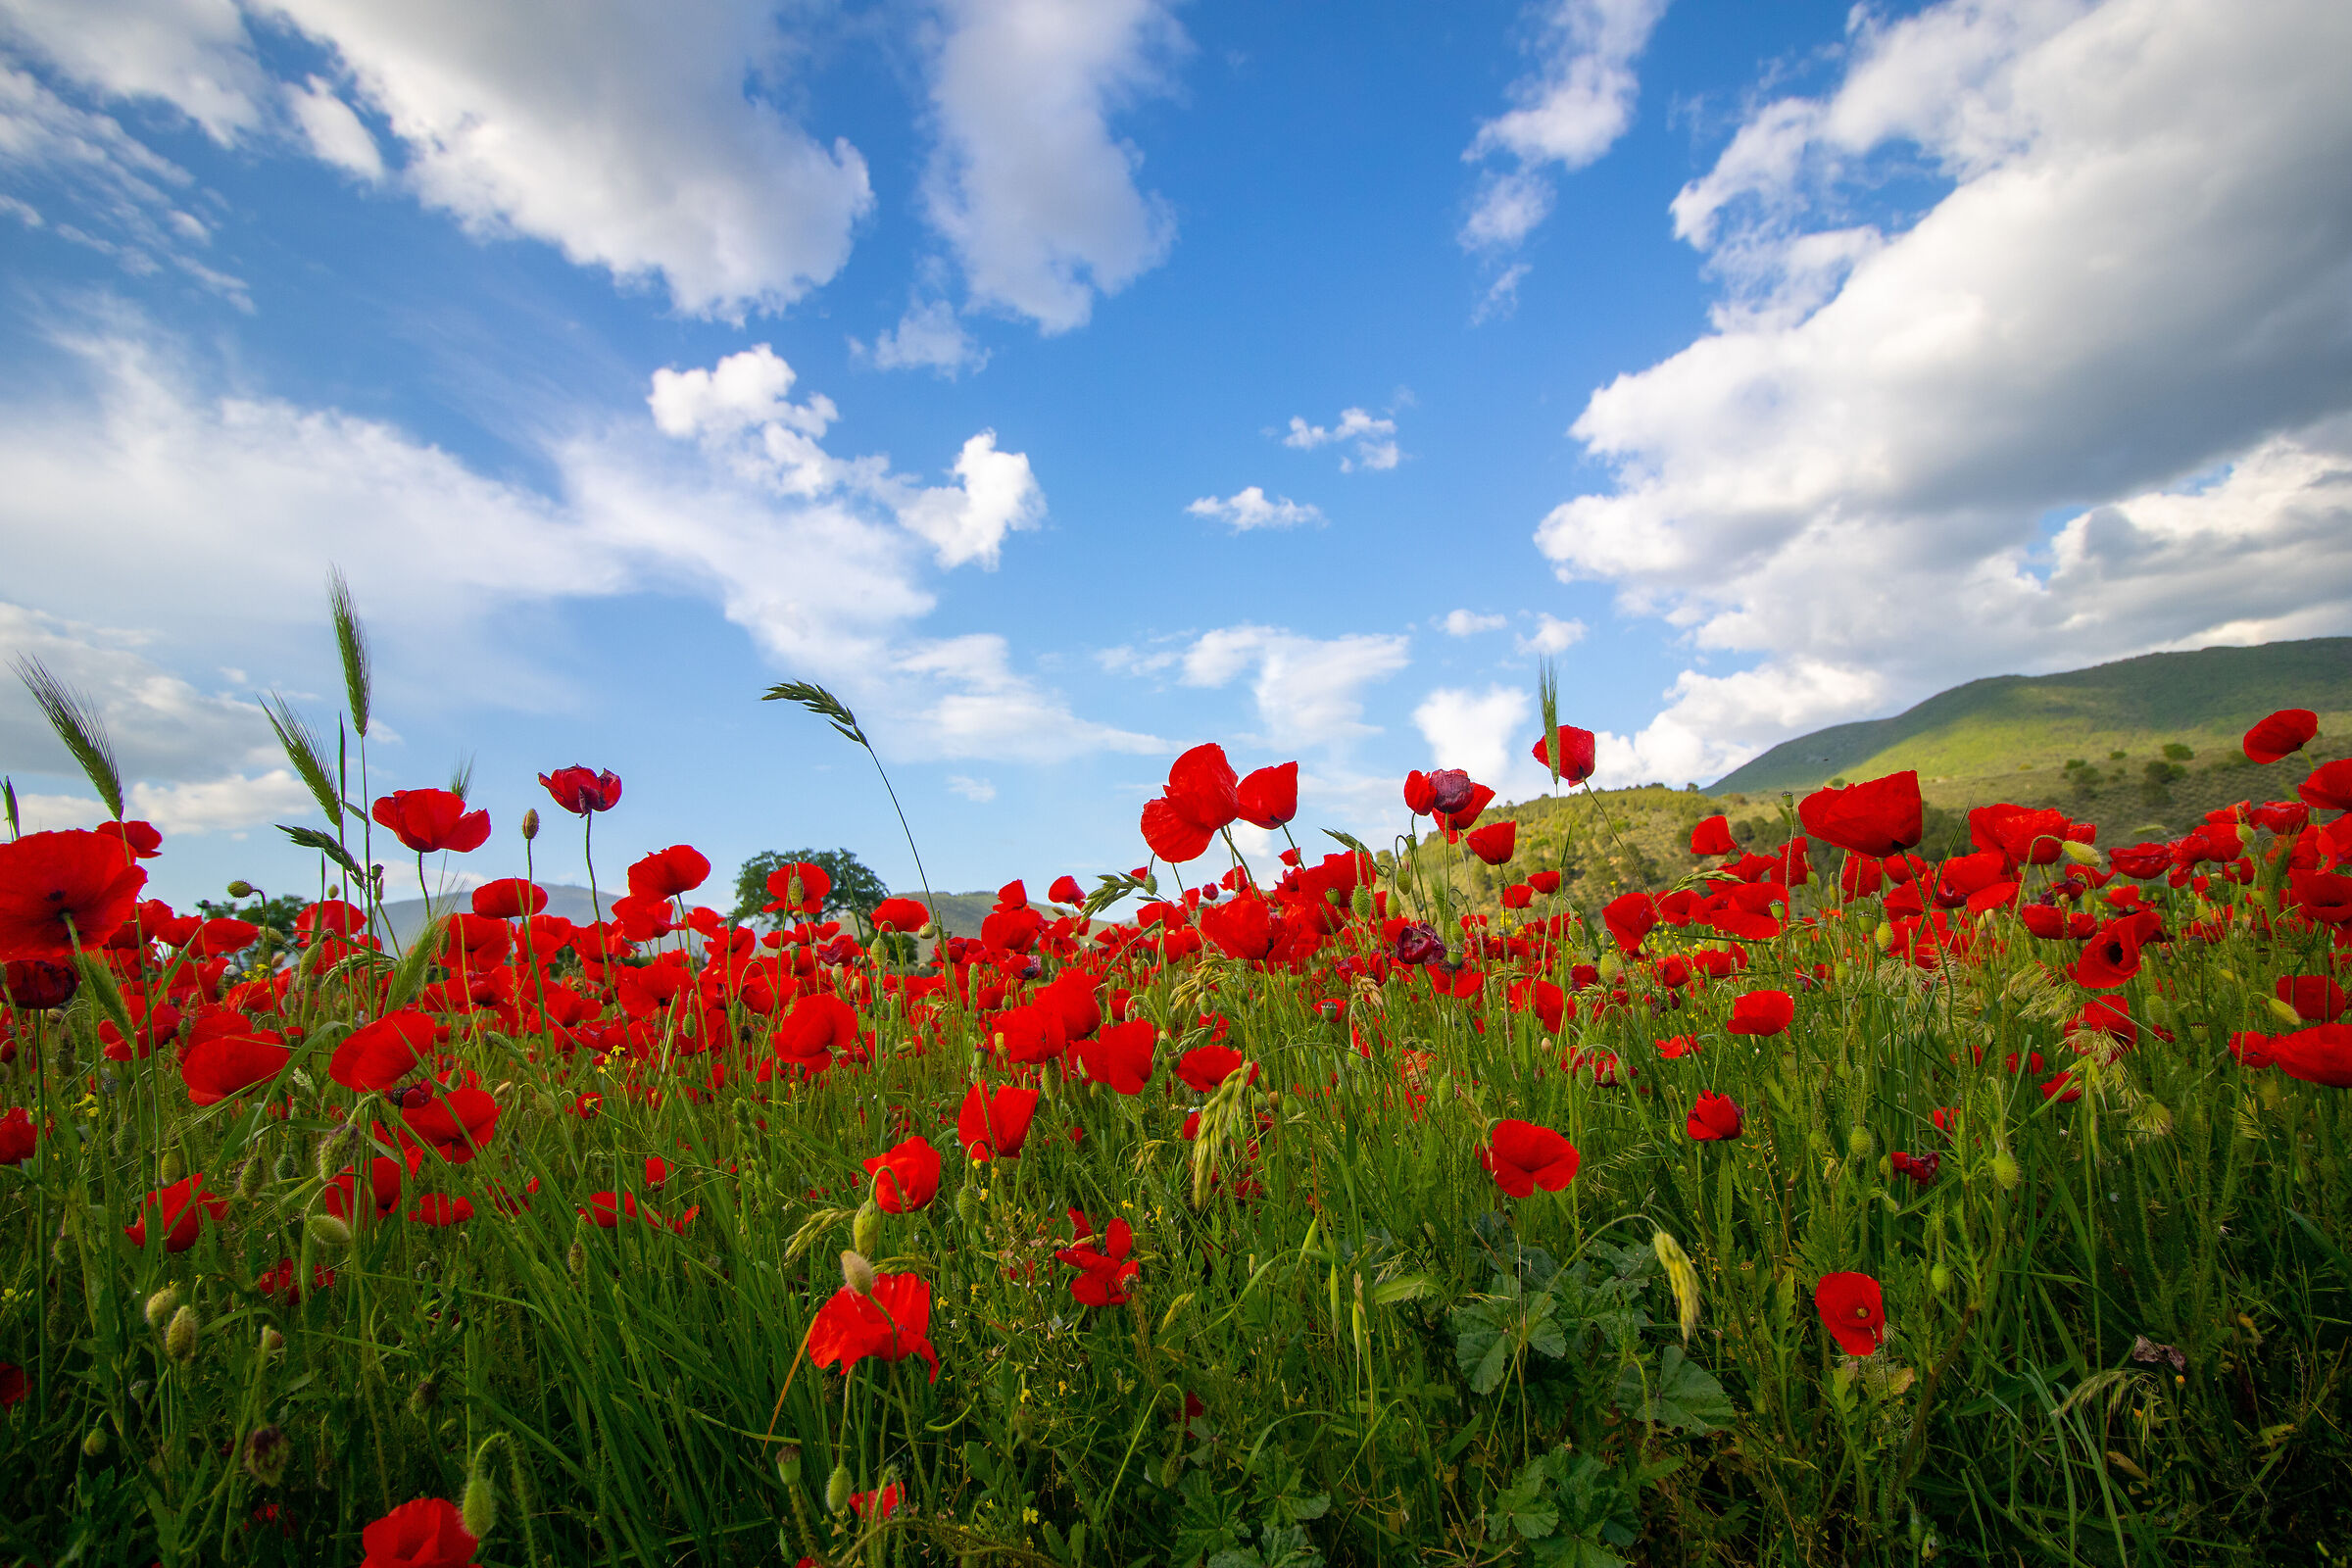 A thousand red poppies...